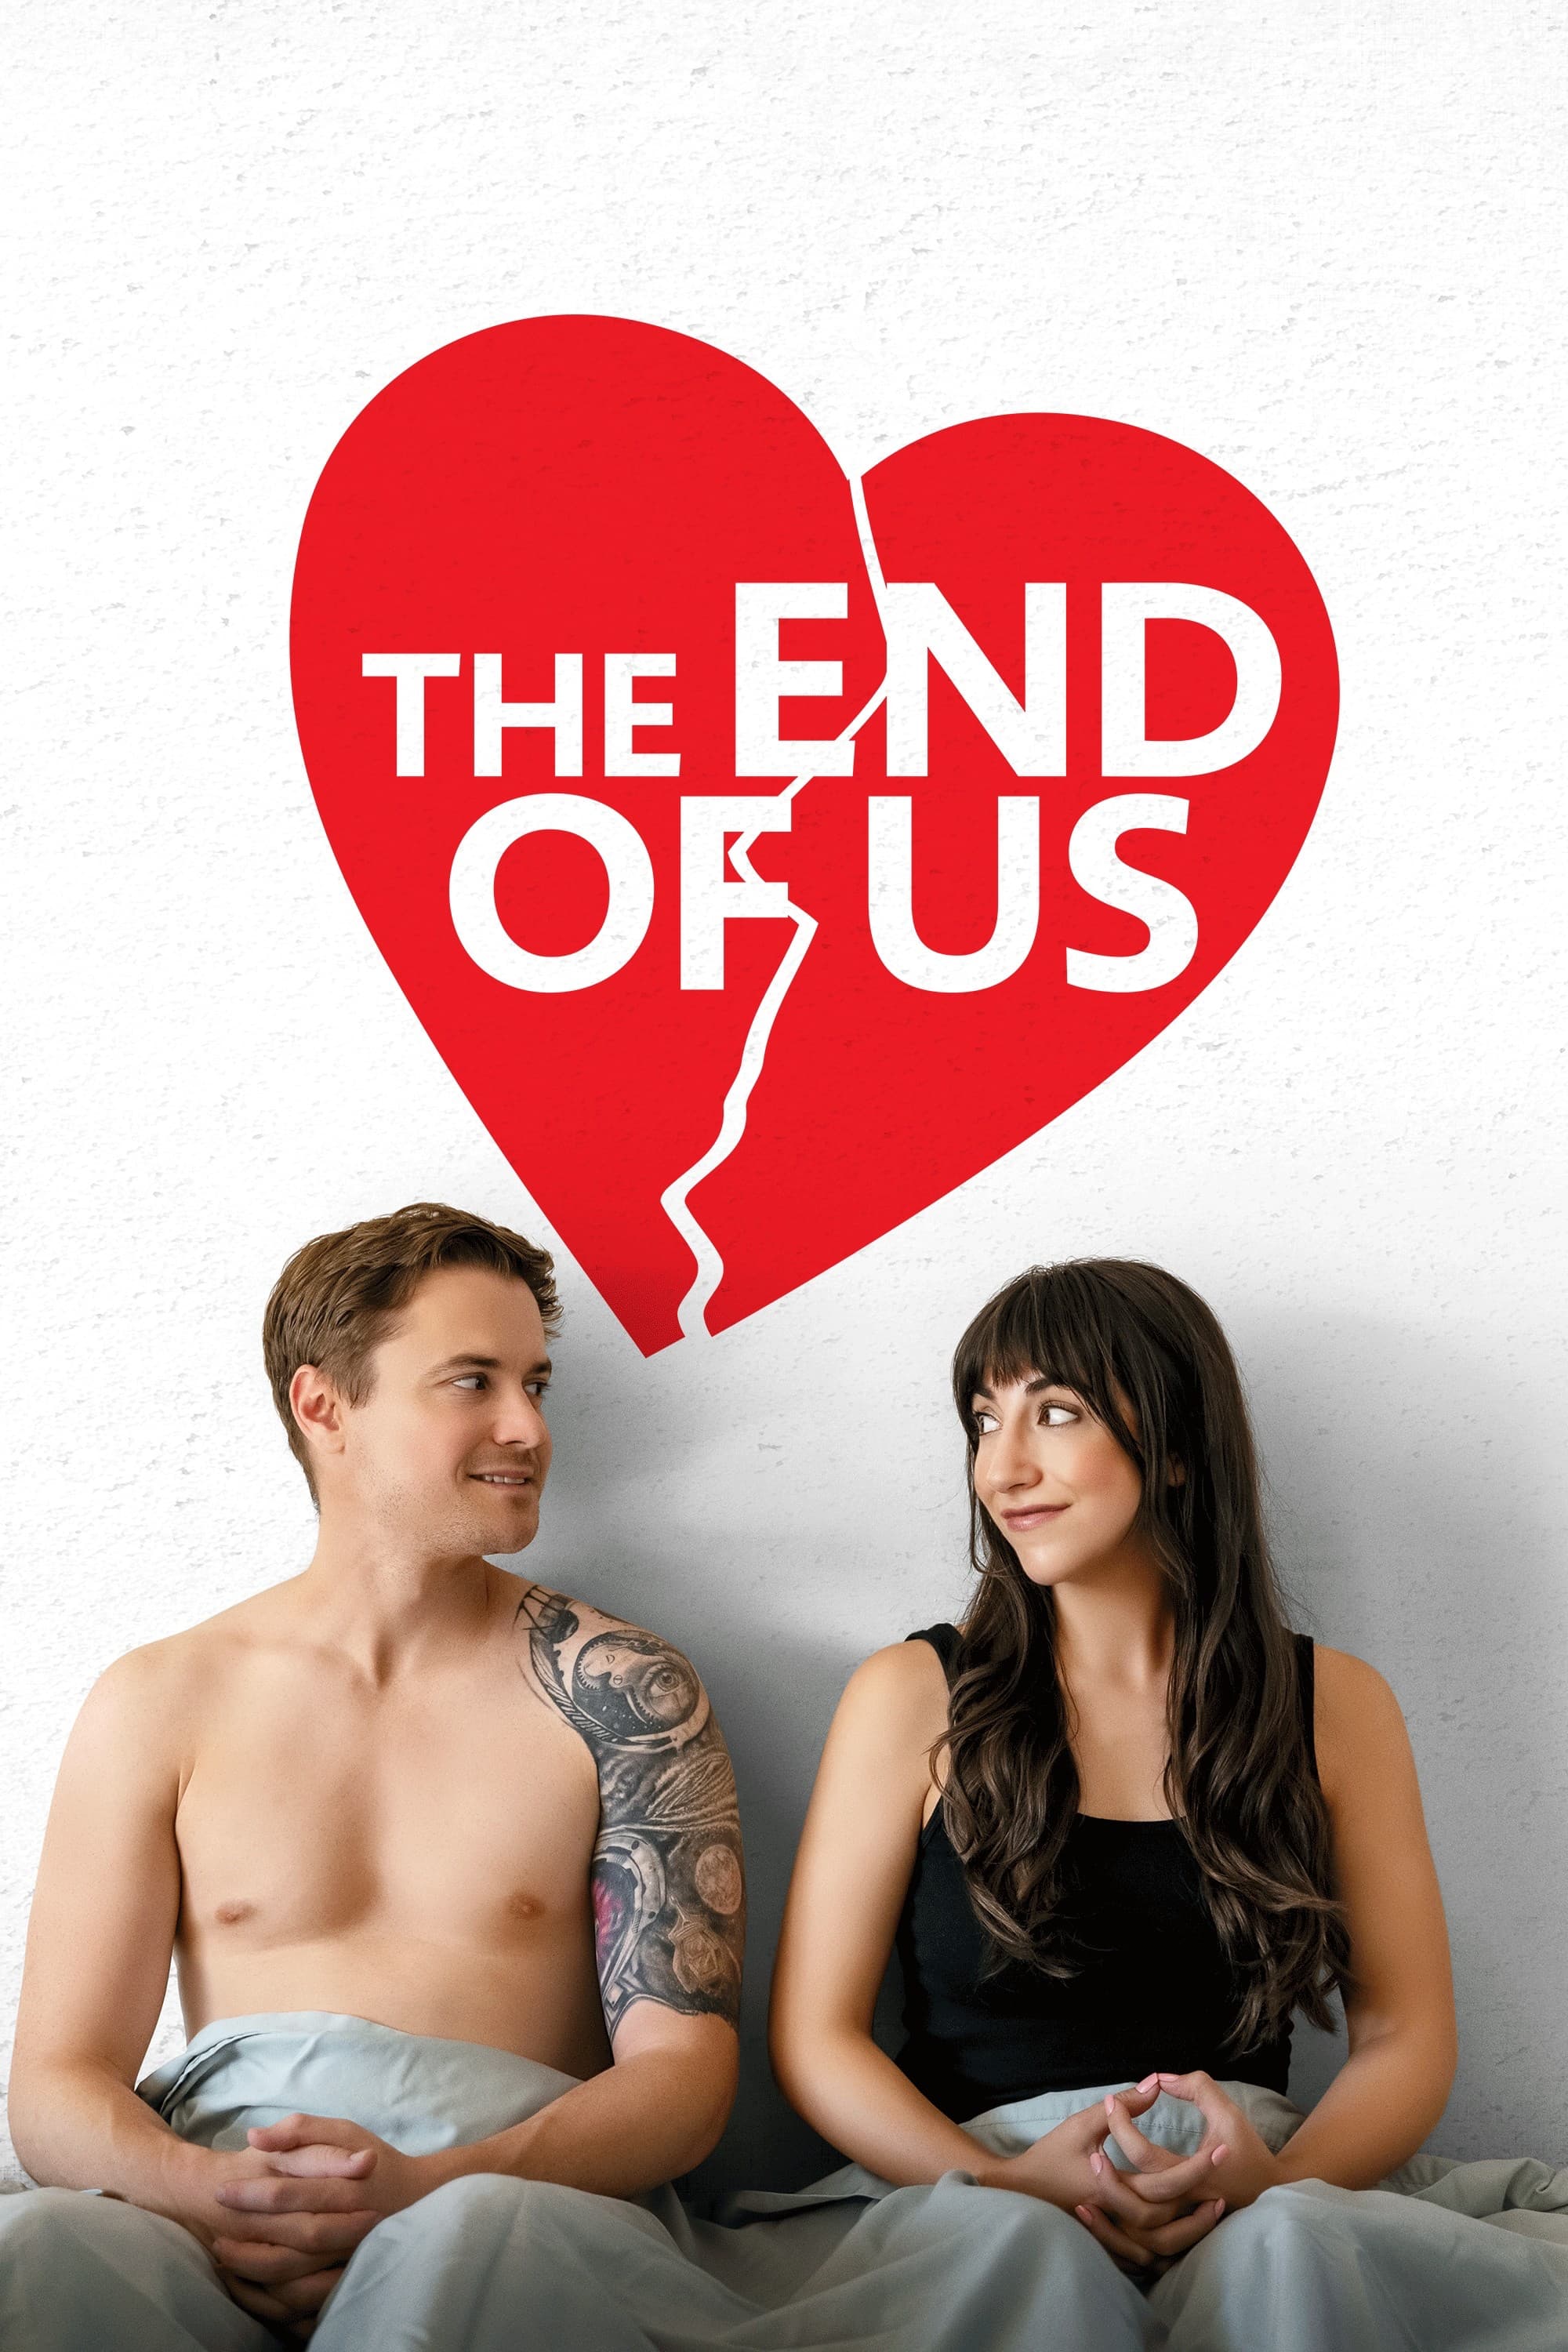 The End of Us film